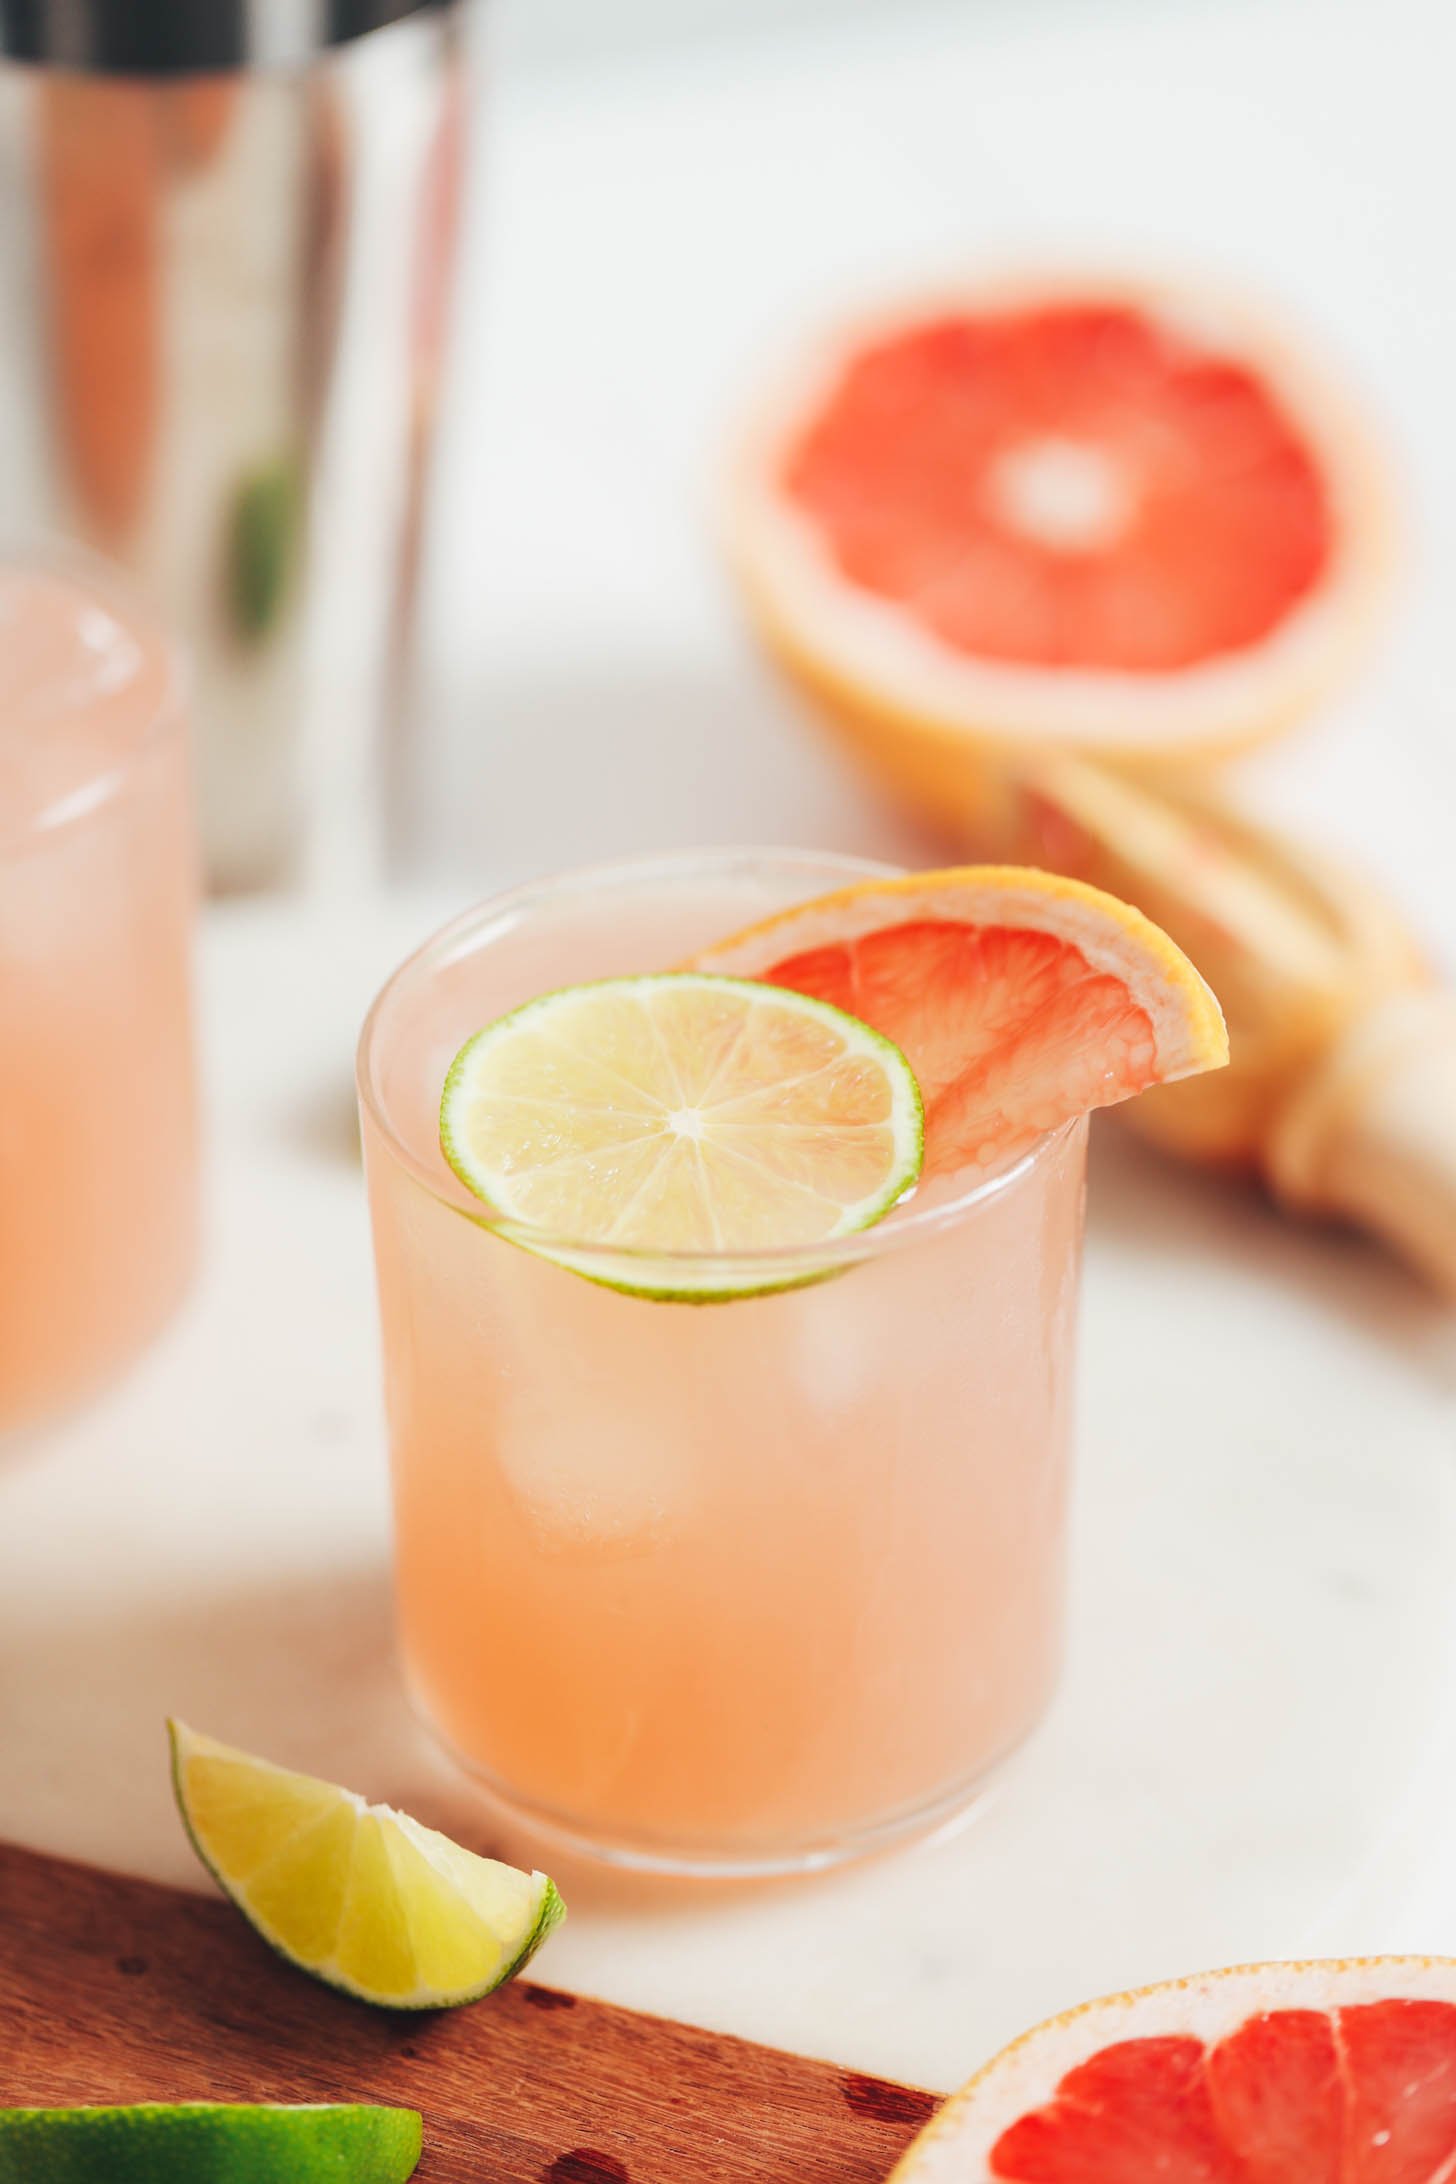 21 Spritz Recipes to Keep You Cool and Bubbly